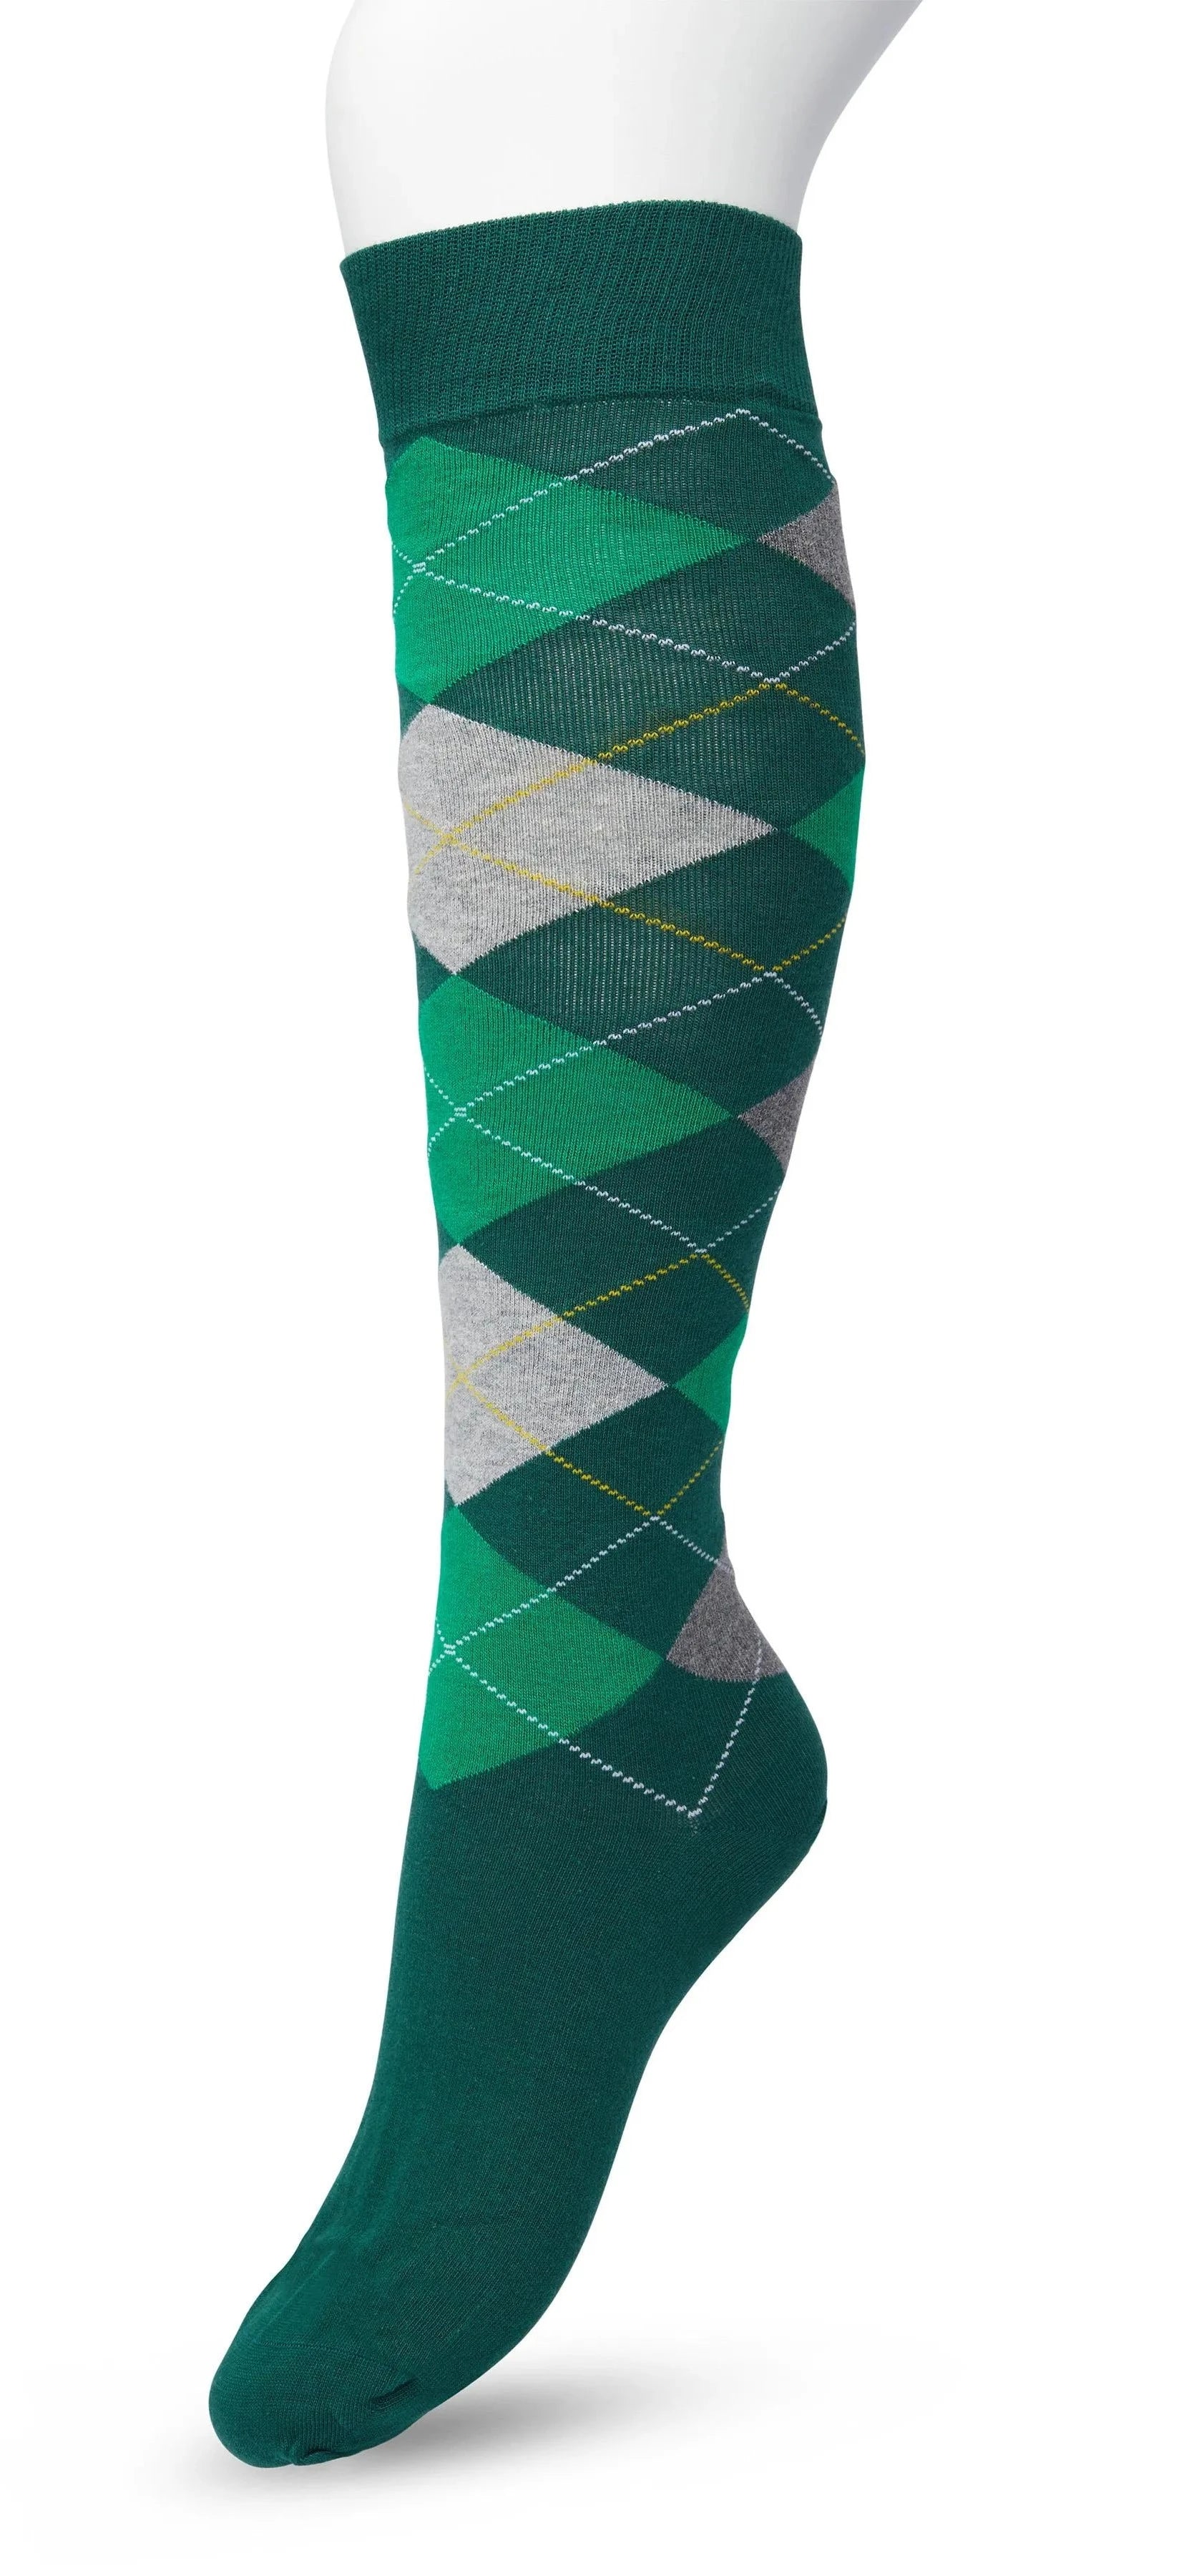 Bonnie Doon BP211505 Argyle Knee-highs - Golf style knee-high socks with a diamond argyle tartan check pattern in shades of green, grey and yellow.